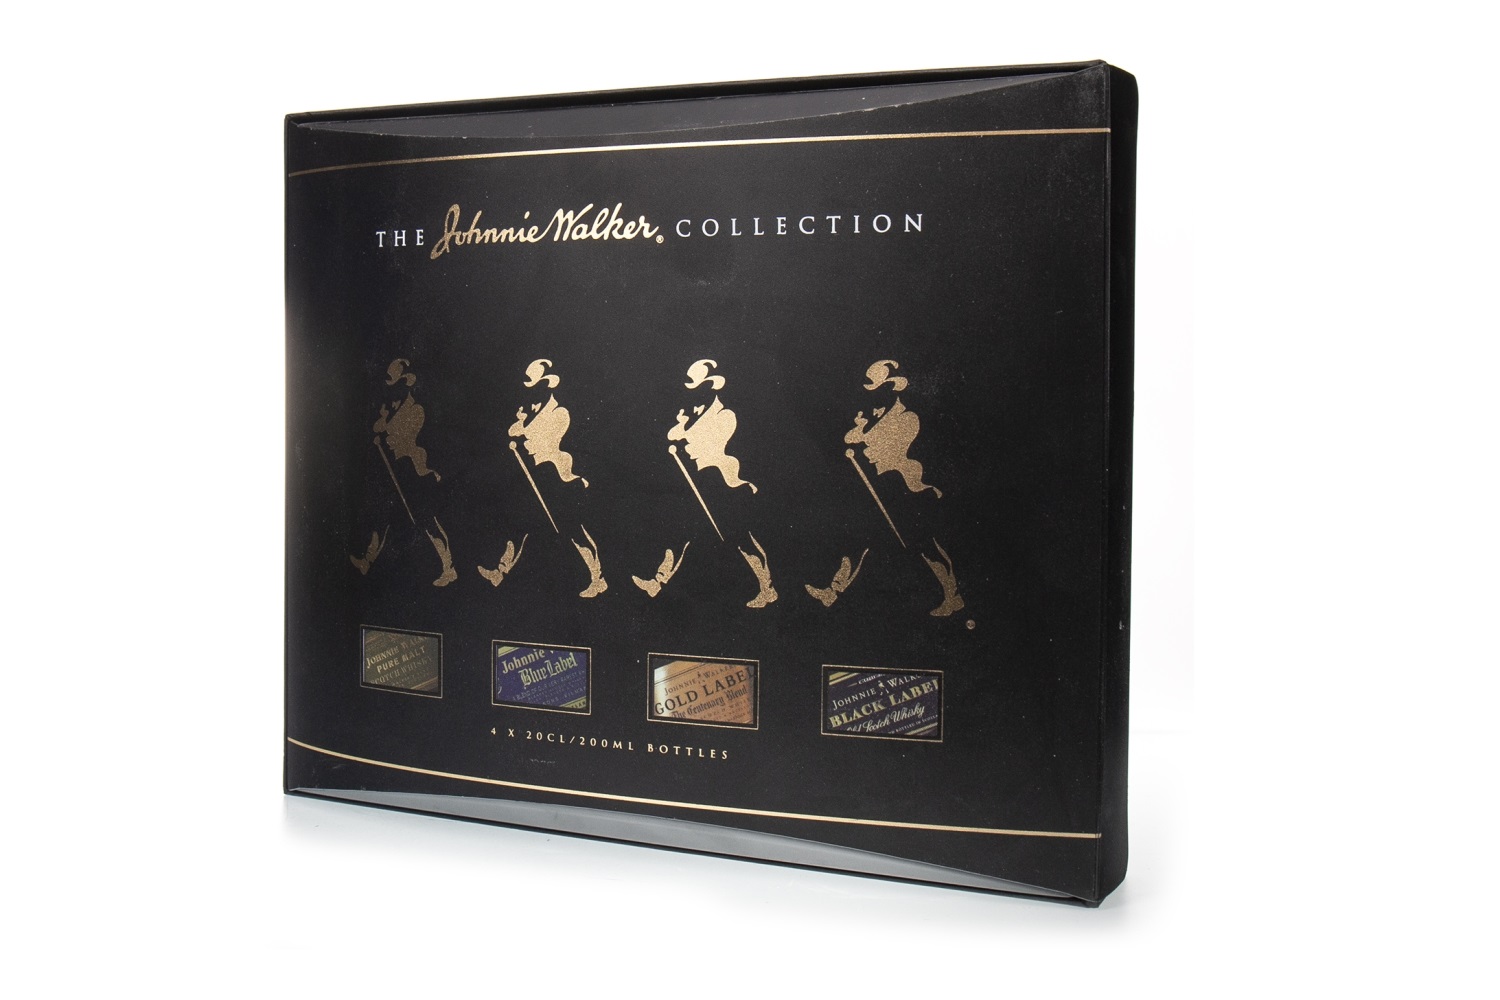 THE JOHNNIE WALKER COLLECTION (4X20CL) - Image 2 of 2